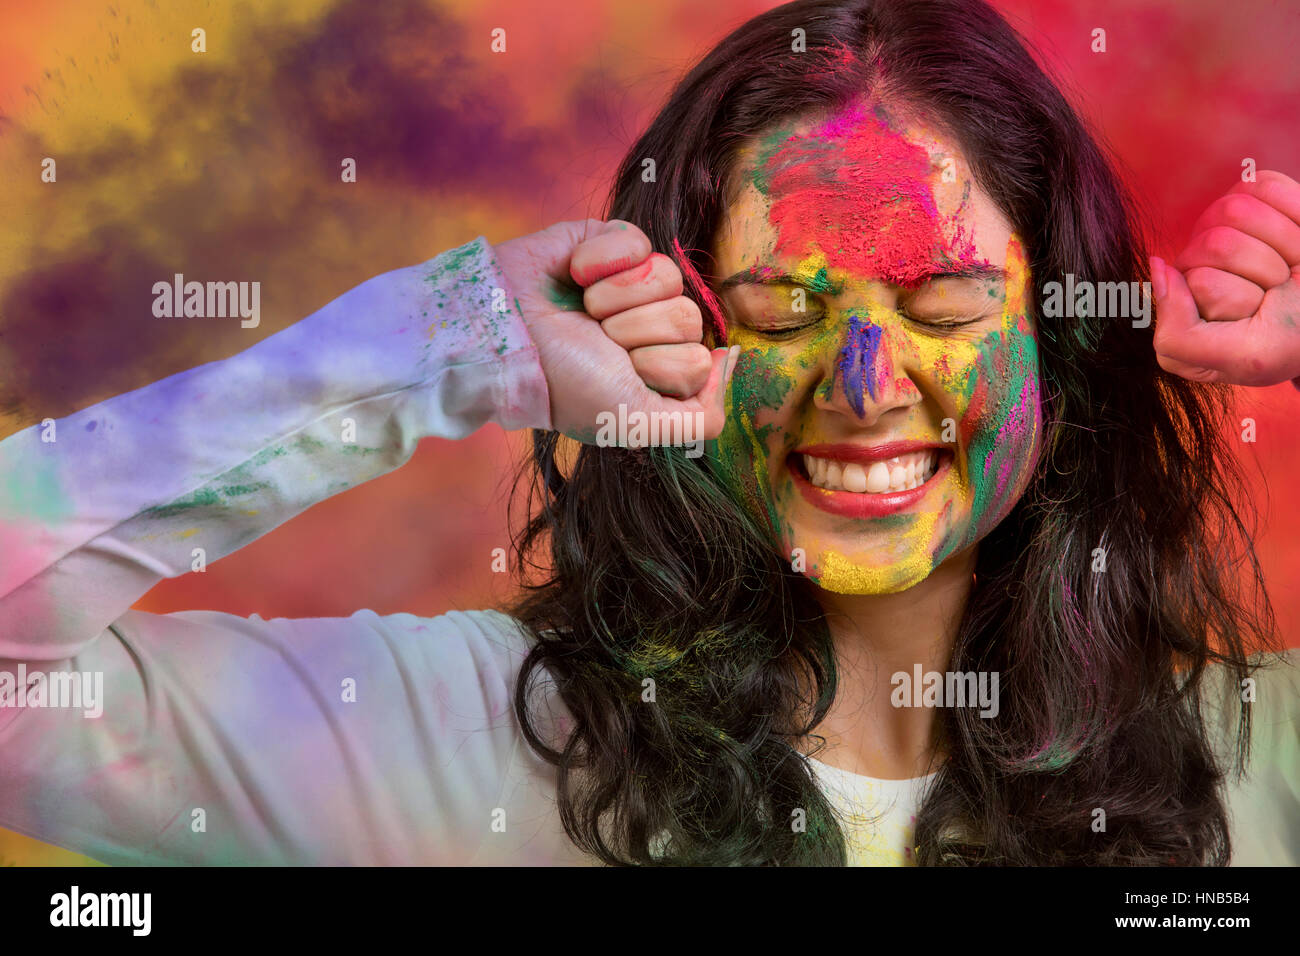 Here Are The Top 30+ Holi Inspired Pre-Wedding Shoot Ideas!